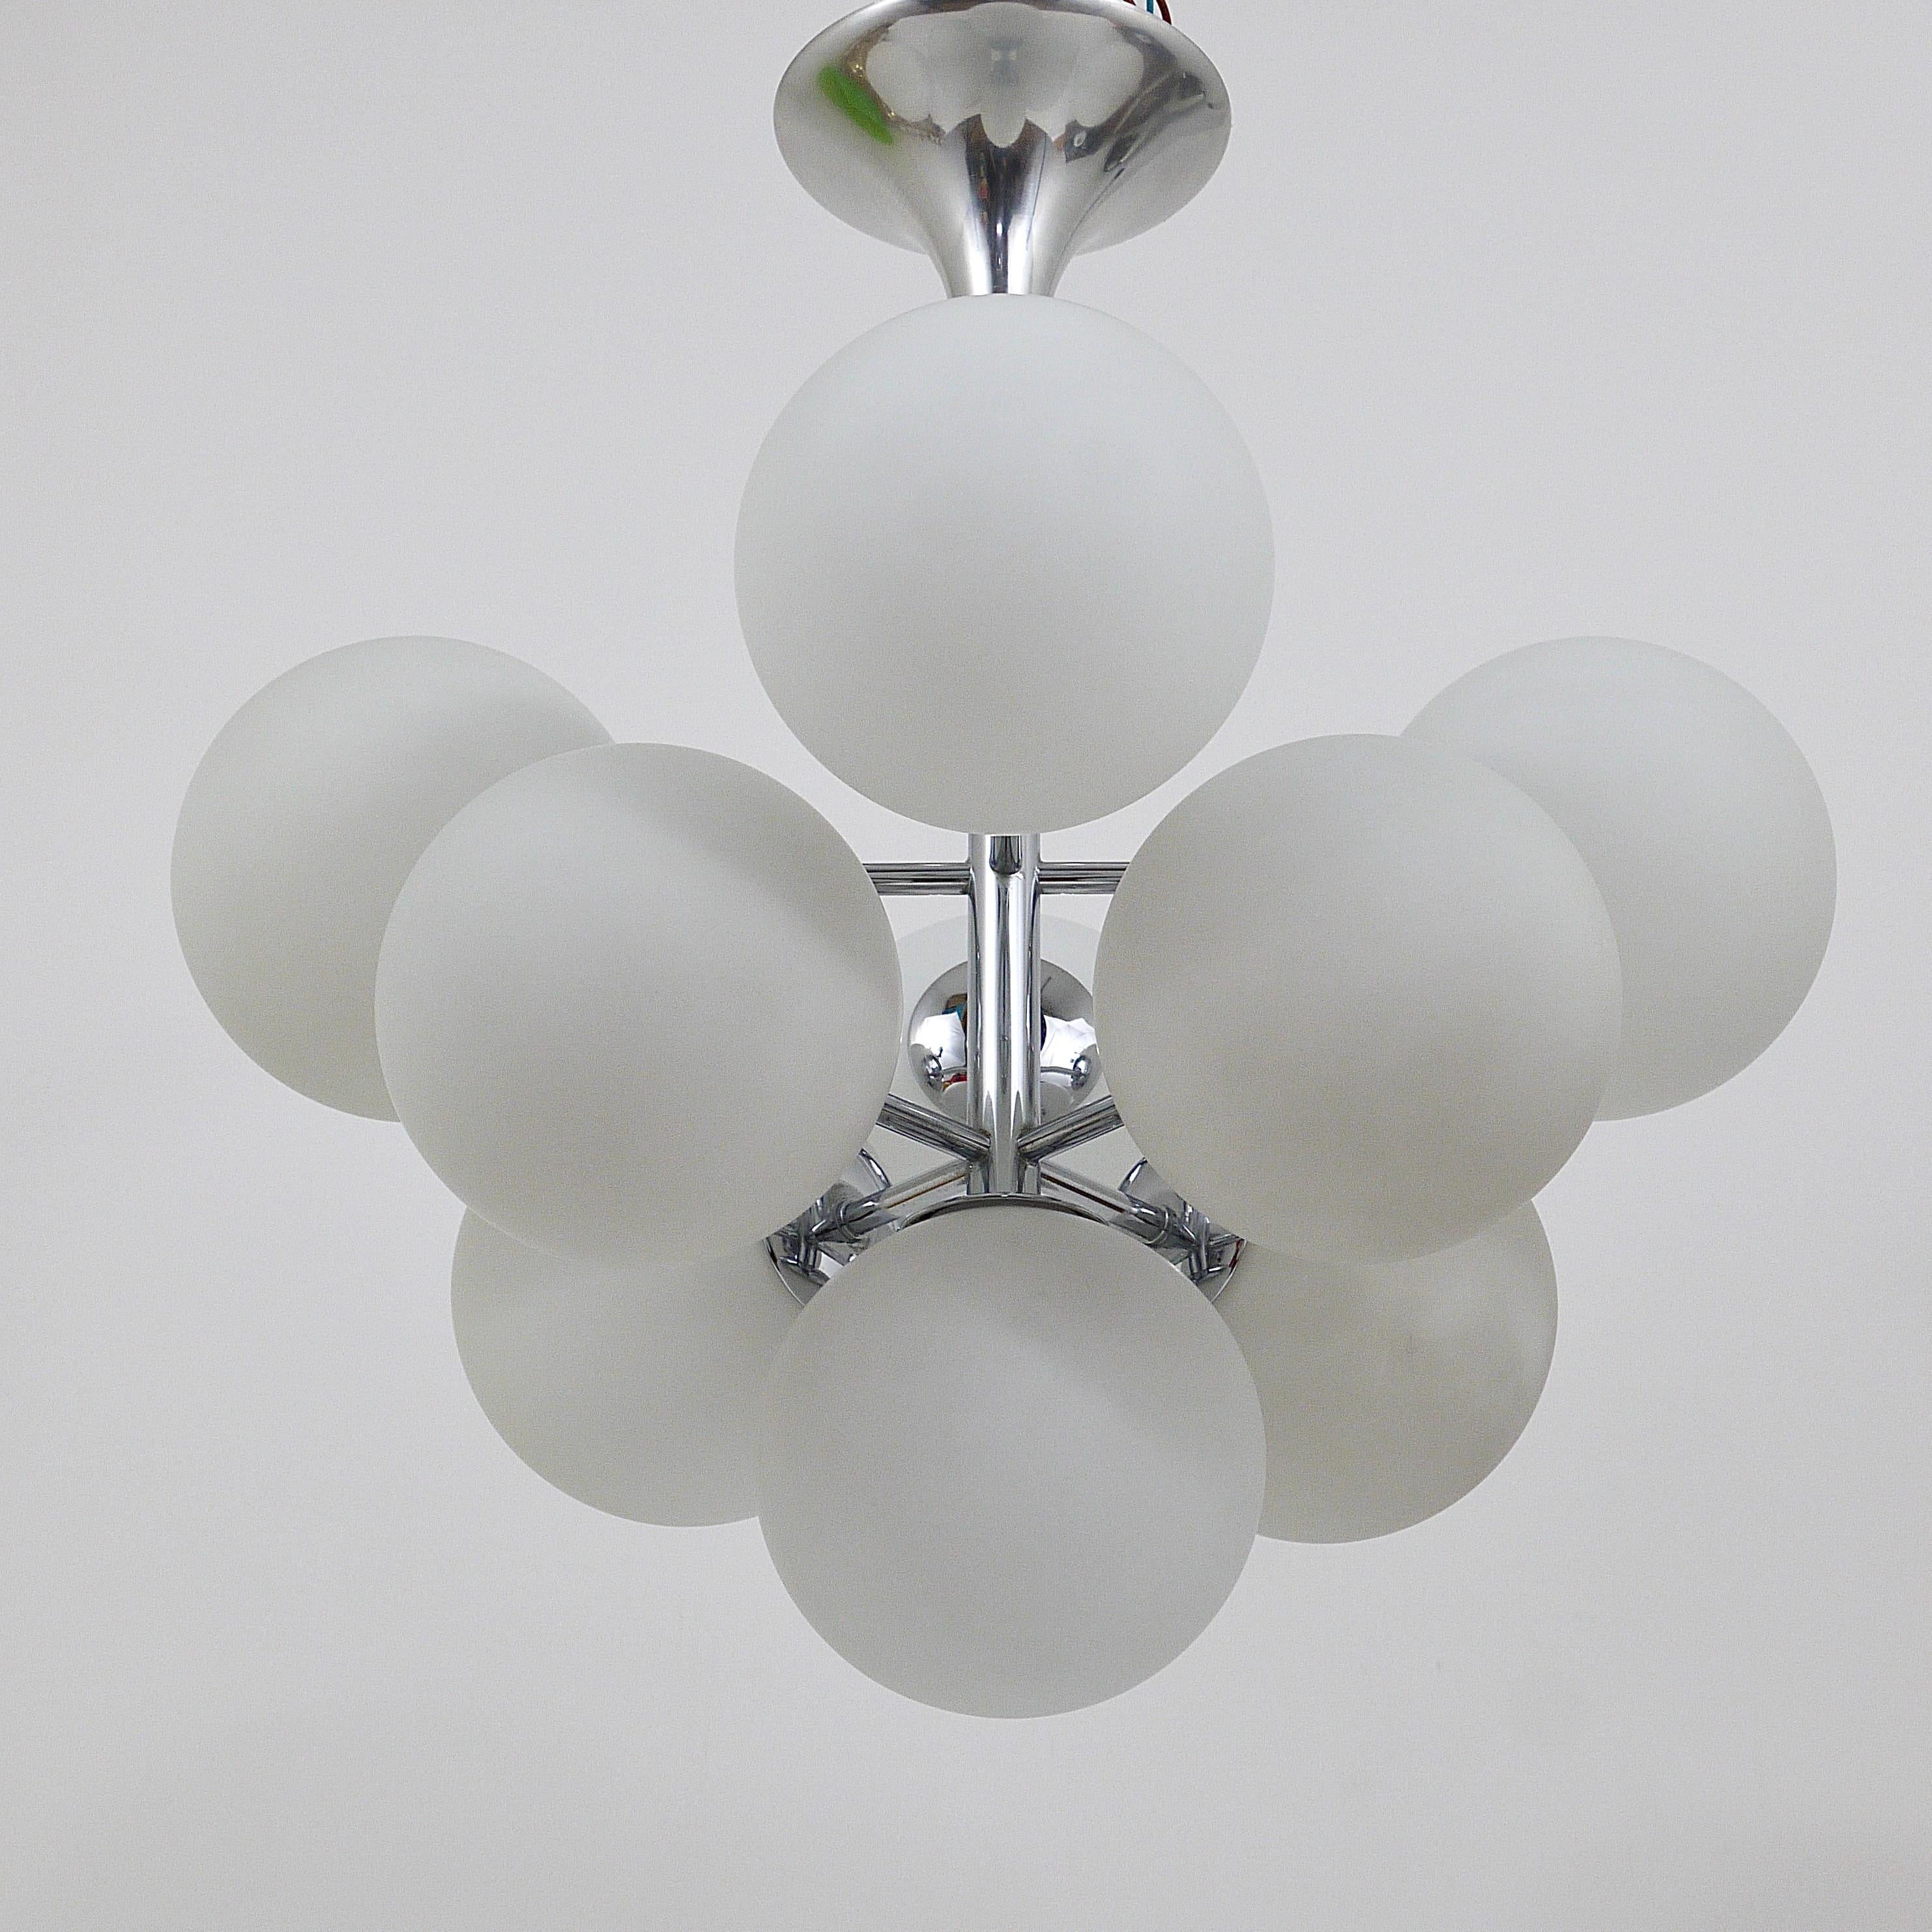 Chromed Atomic Chandelier with White Glass Globes, Temde, Switzerland For Sale 1